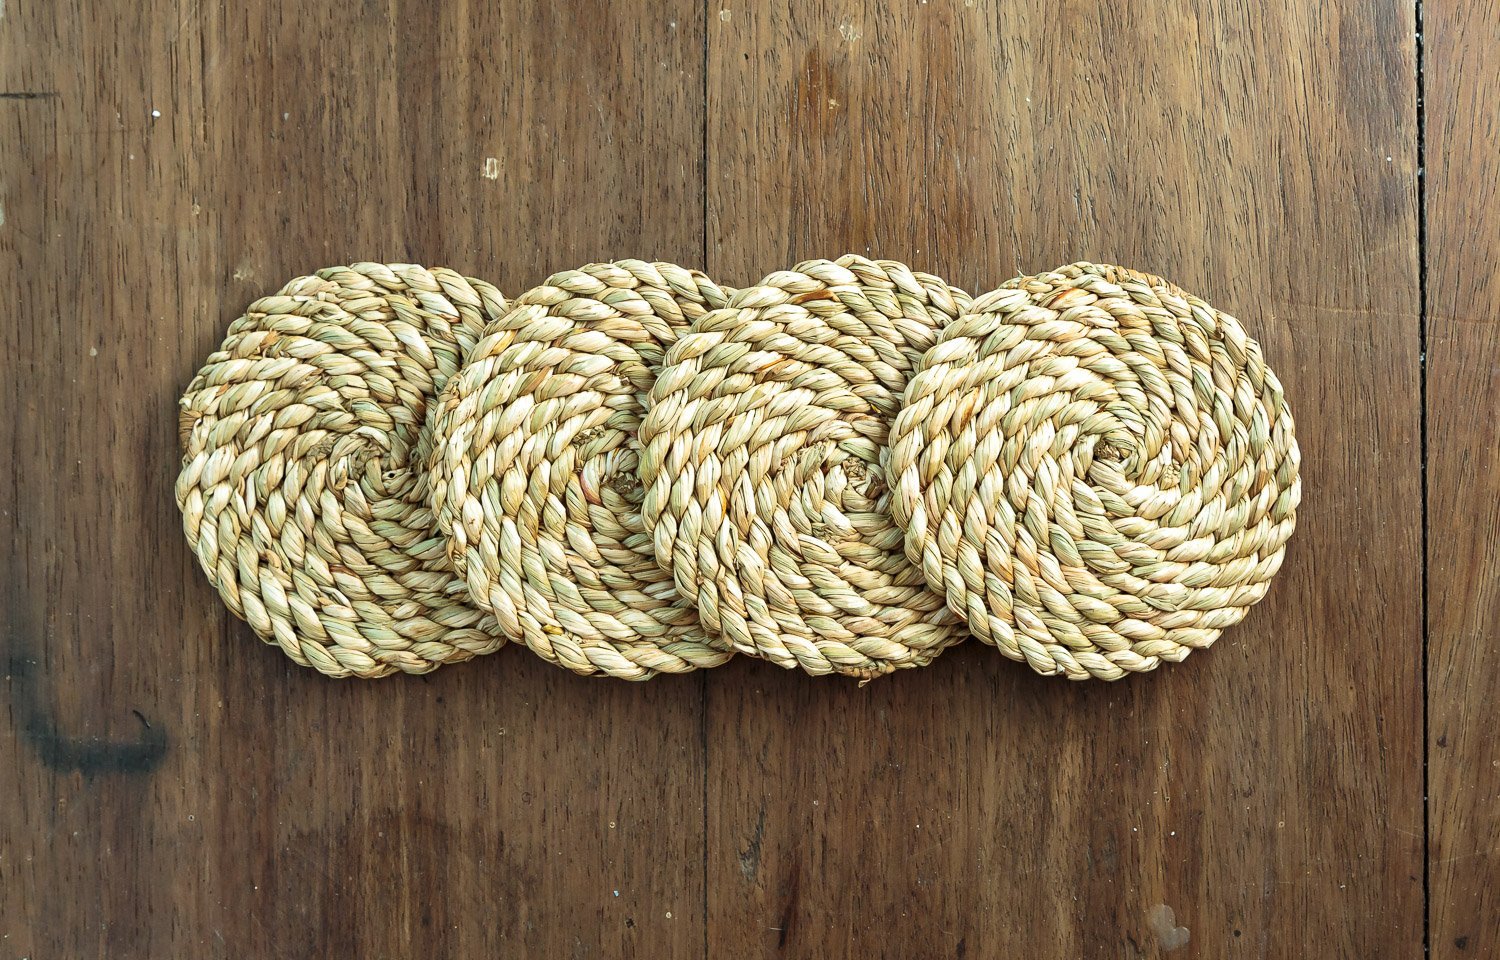 Woven Coasters Set - Grass Twist - Weaving by TRIBAL TEXTILES - Handcrafted Home Decor Interiors - African Made